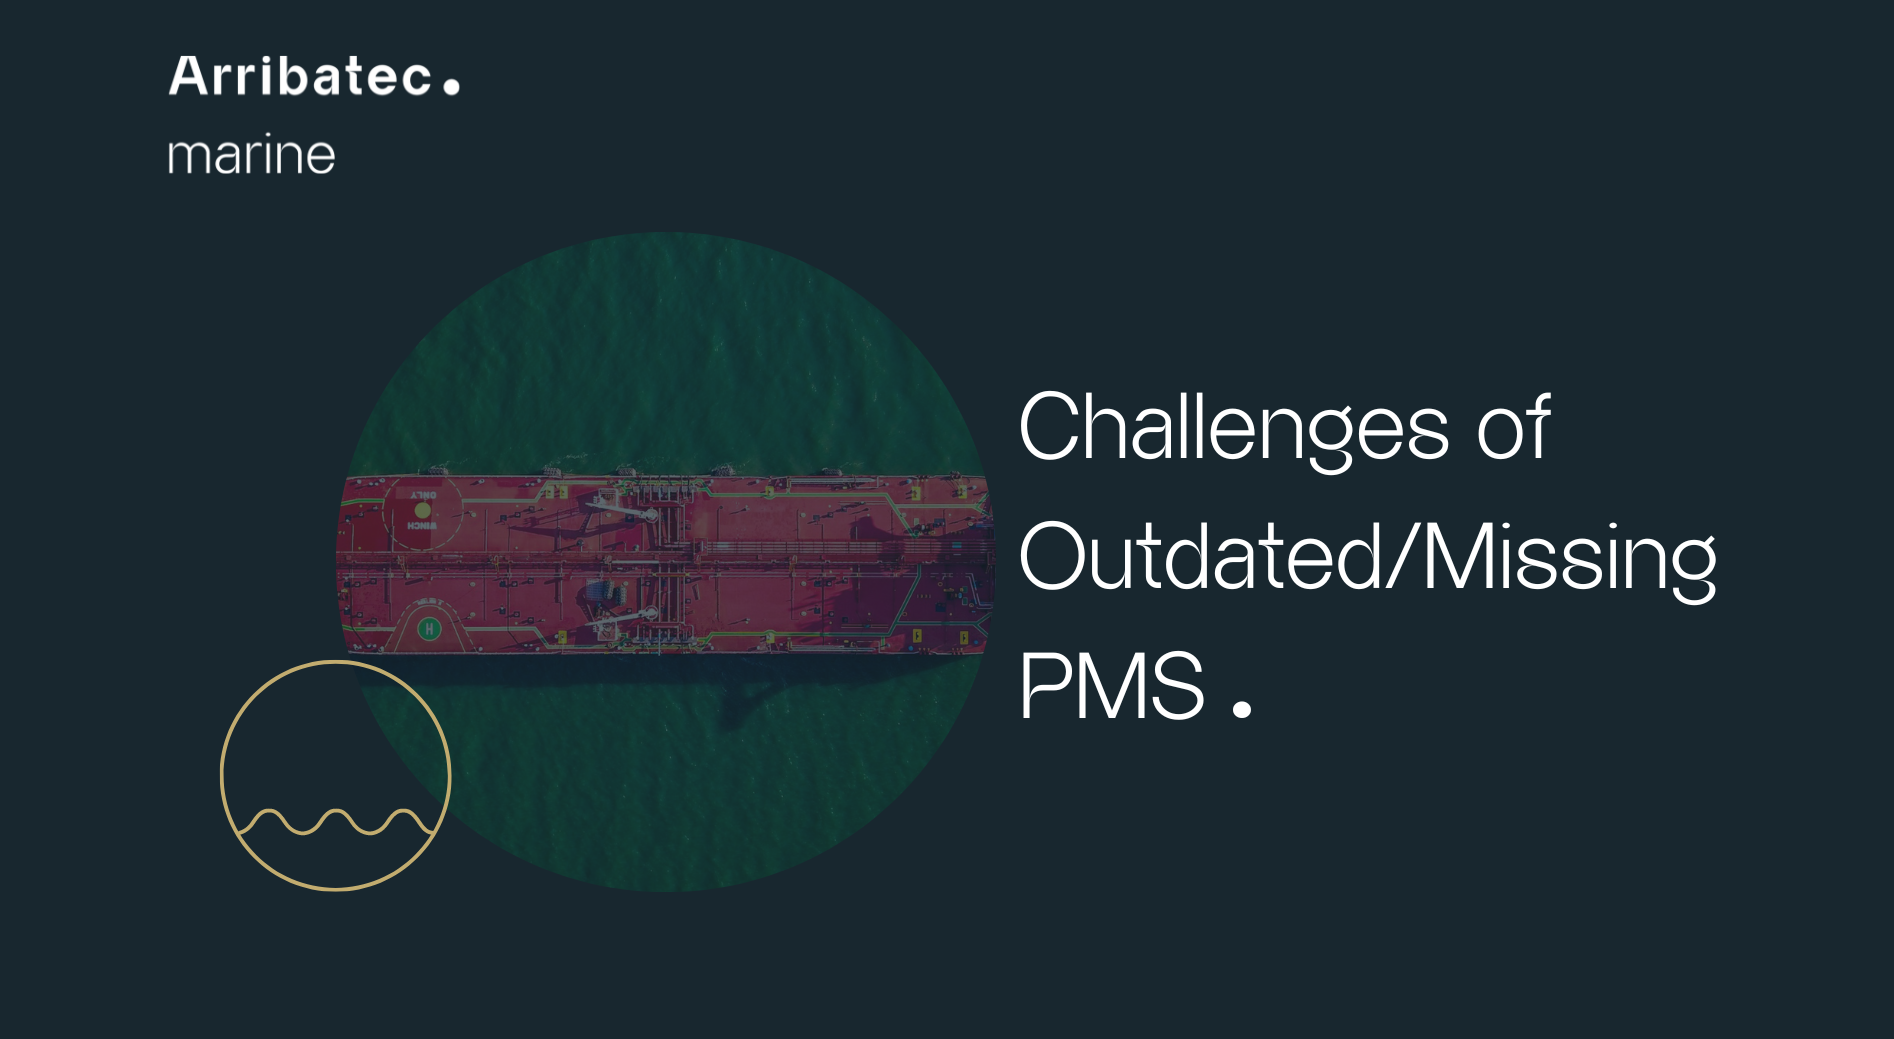 Challenges of outdated or missing PMS